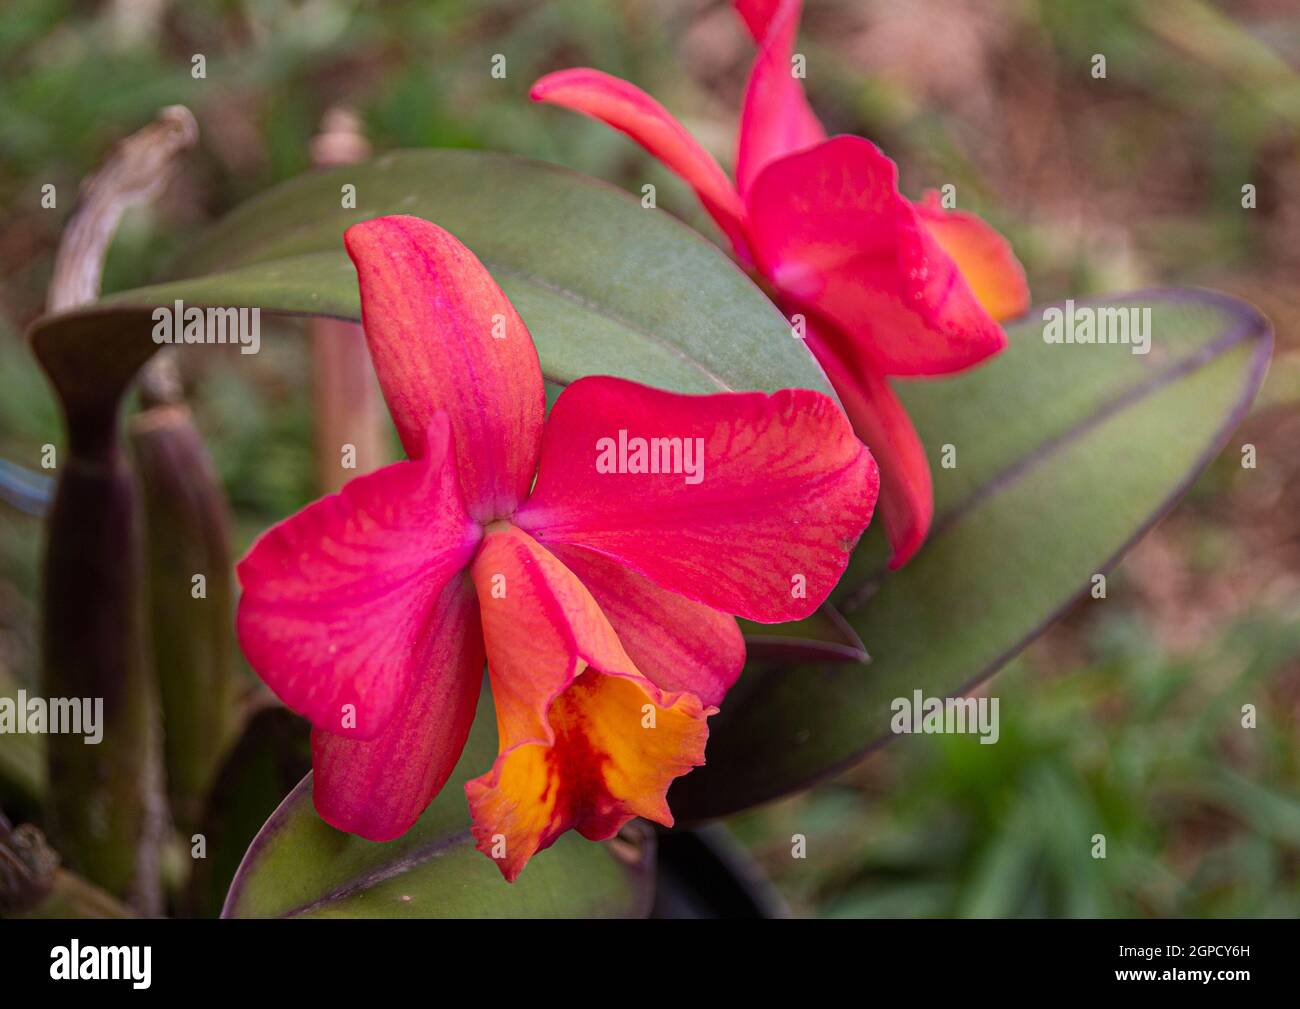 Orange cattleys orchid flower with leathery leaves Stock Photo